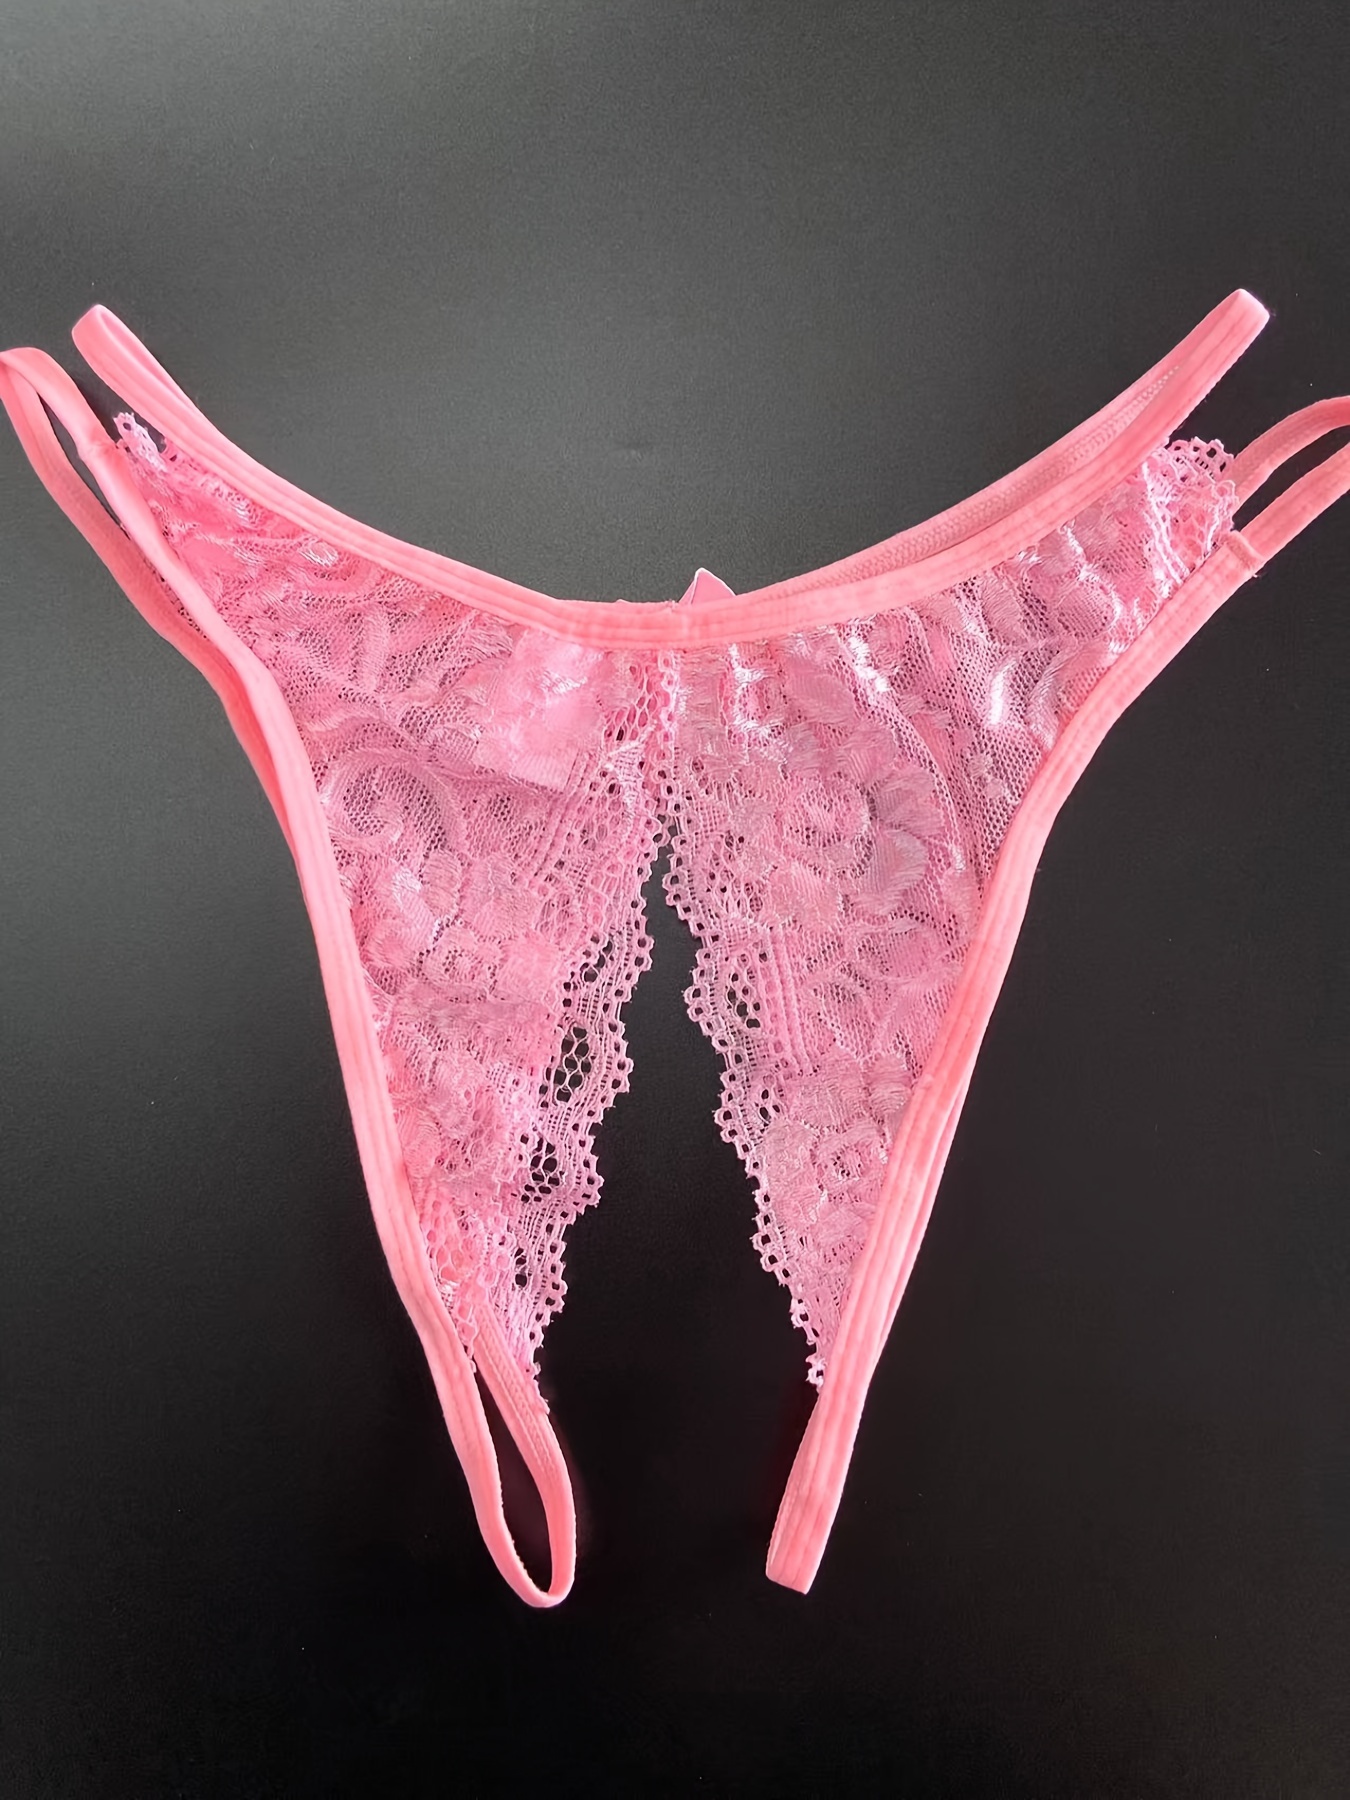 Womens Crotchless Lace Panties Sexy Lingerie Open Crotch Underwear